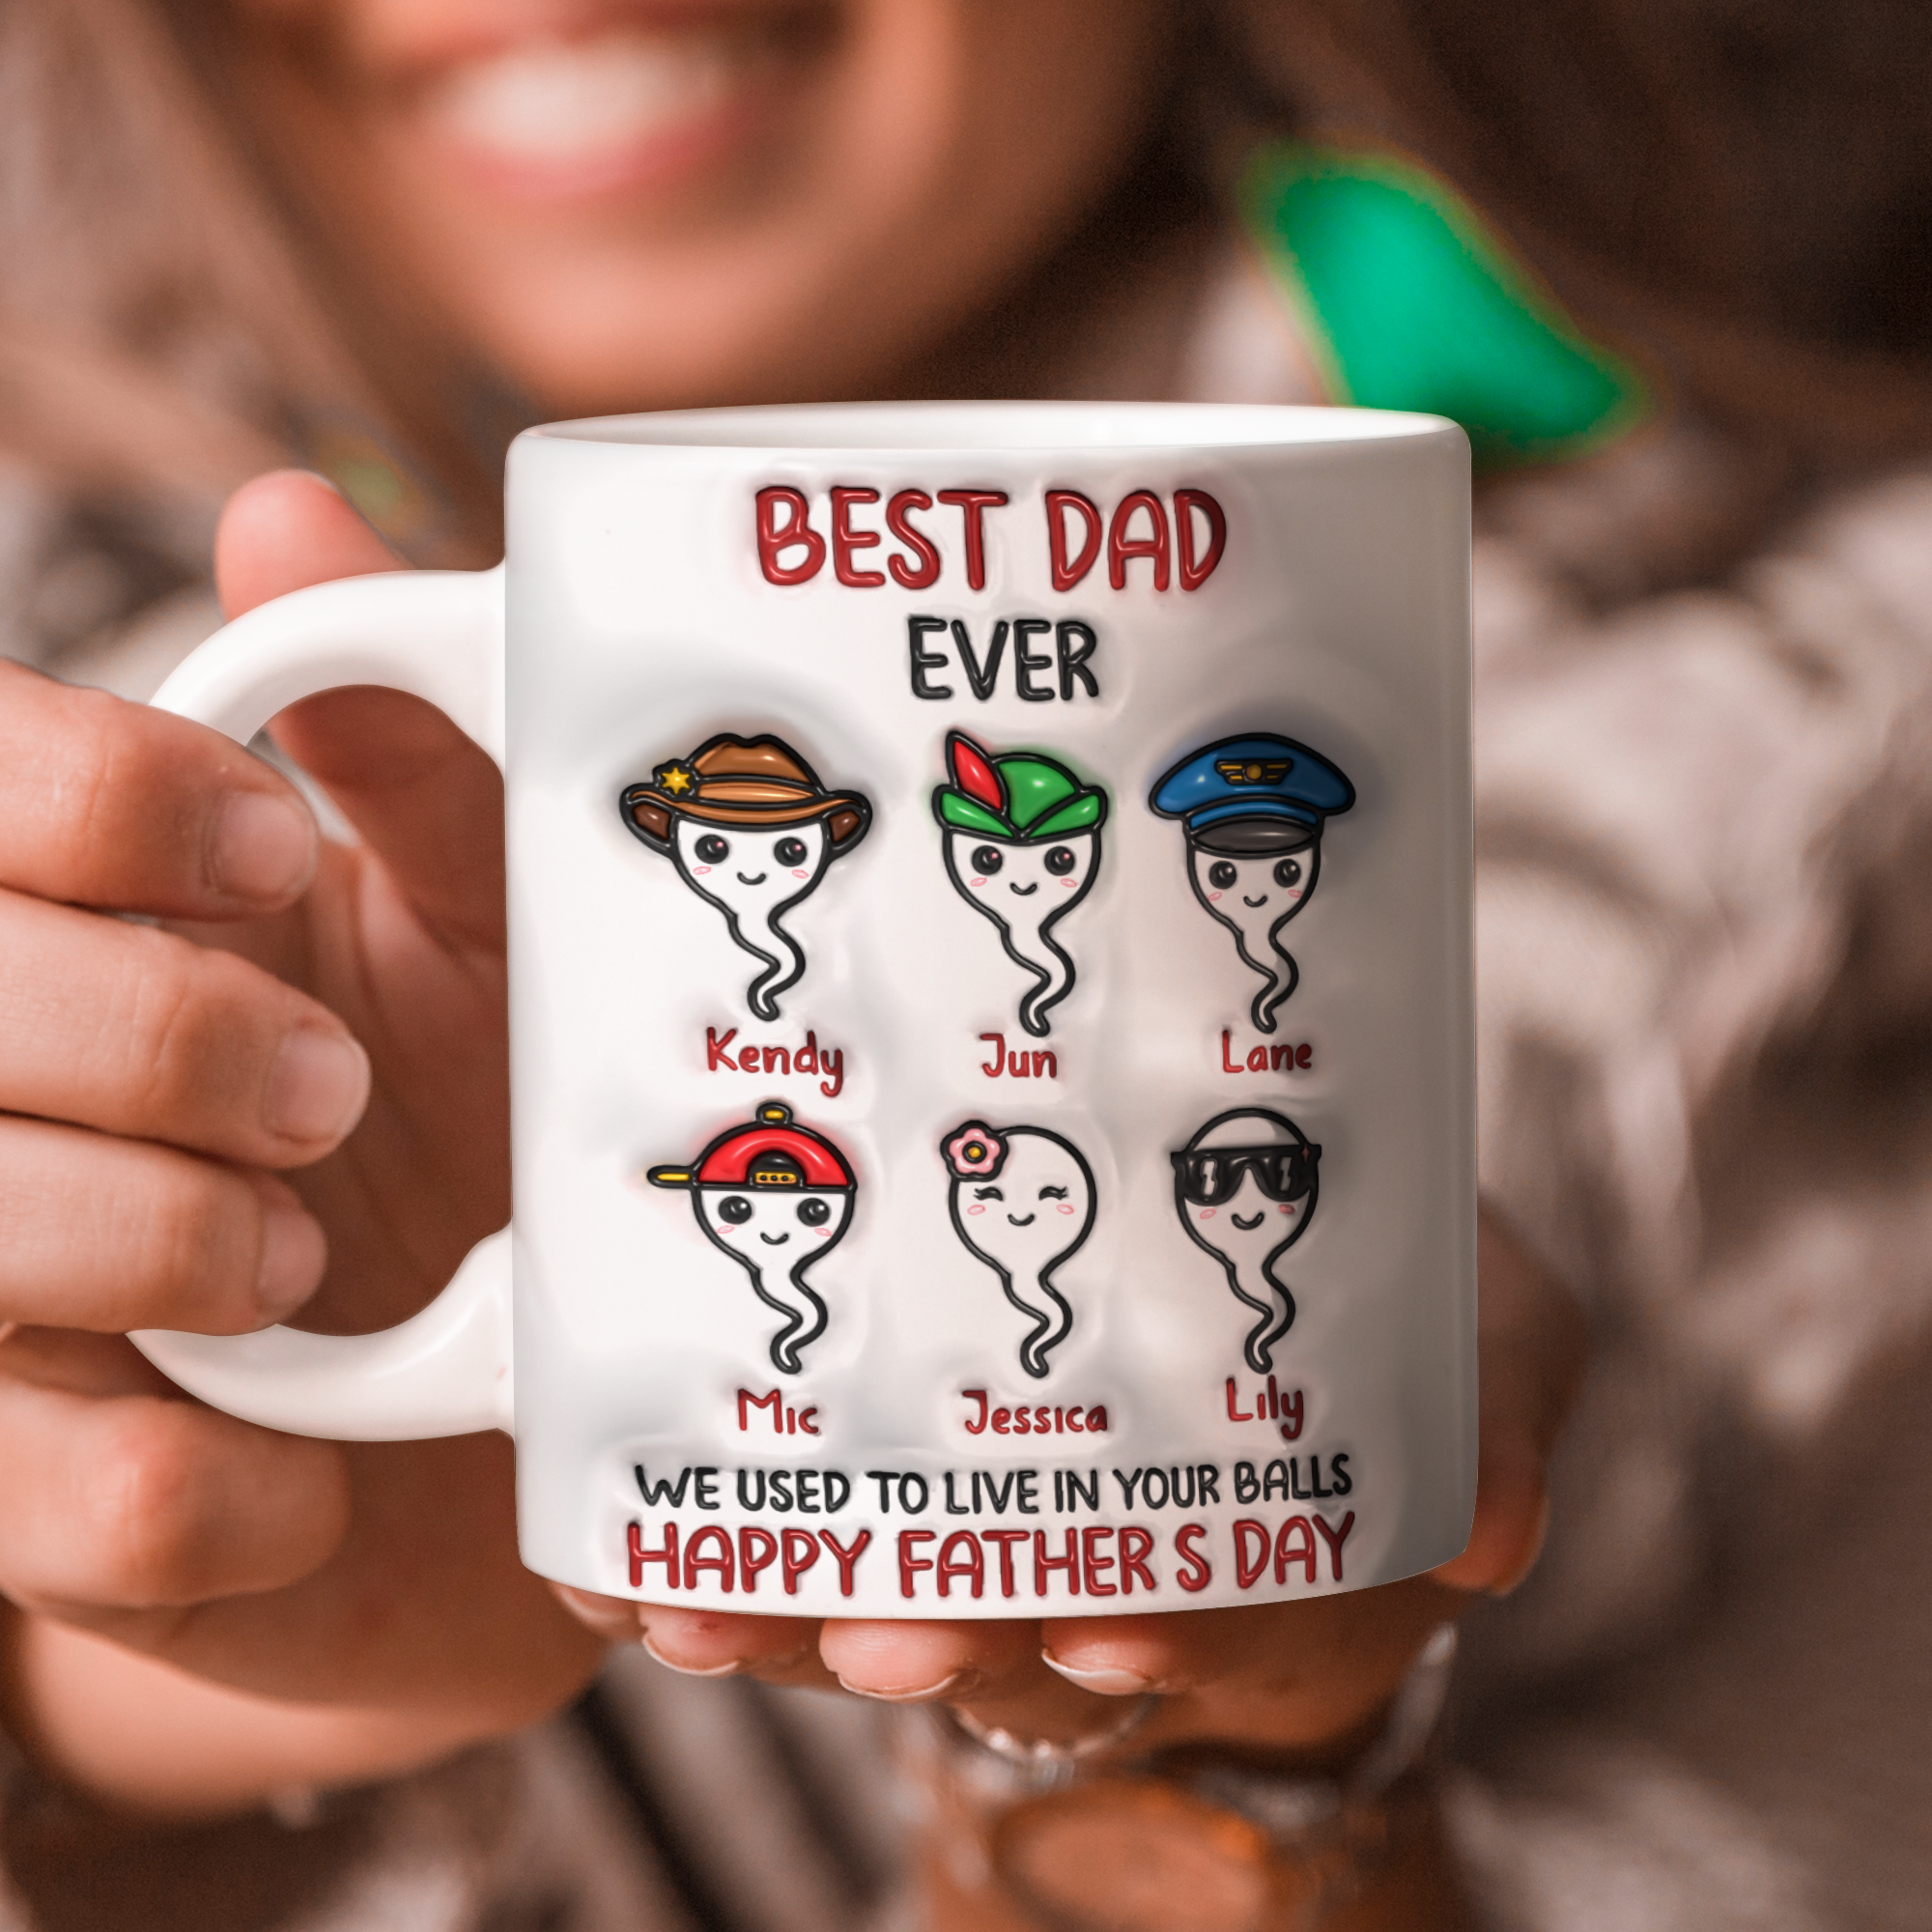 Father's Day Mug Gift, Dad 3d Mug, 3D Mug Gift For Dad : Best Dad Ever, Happy Father's Day